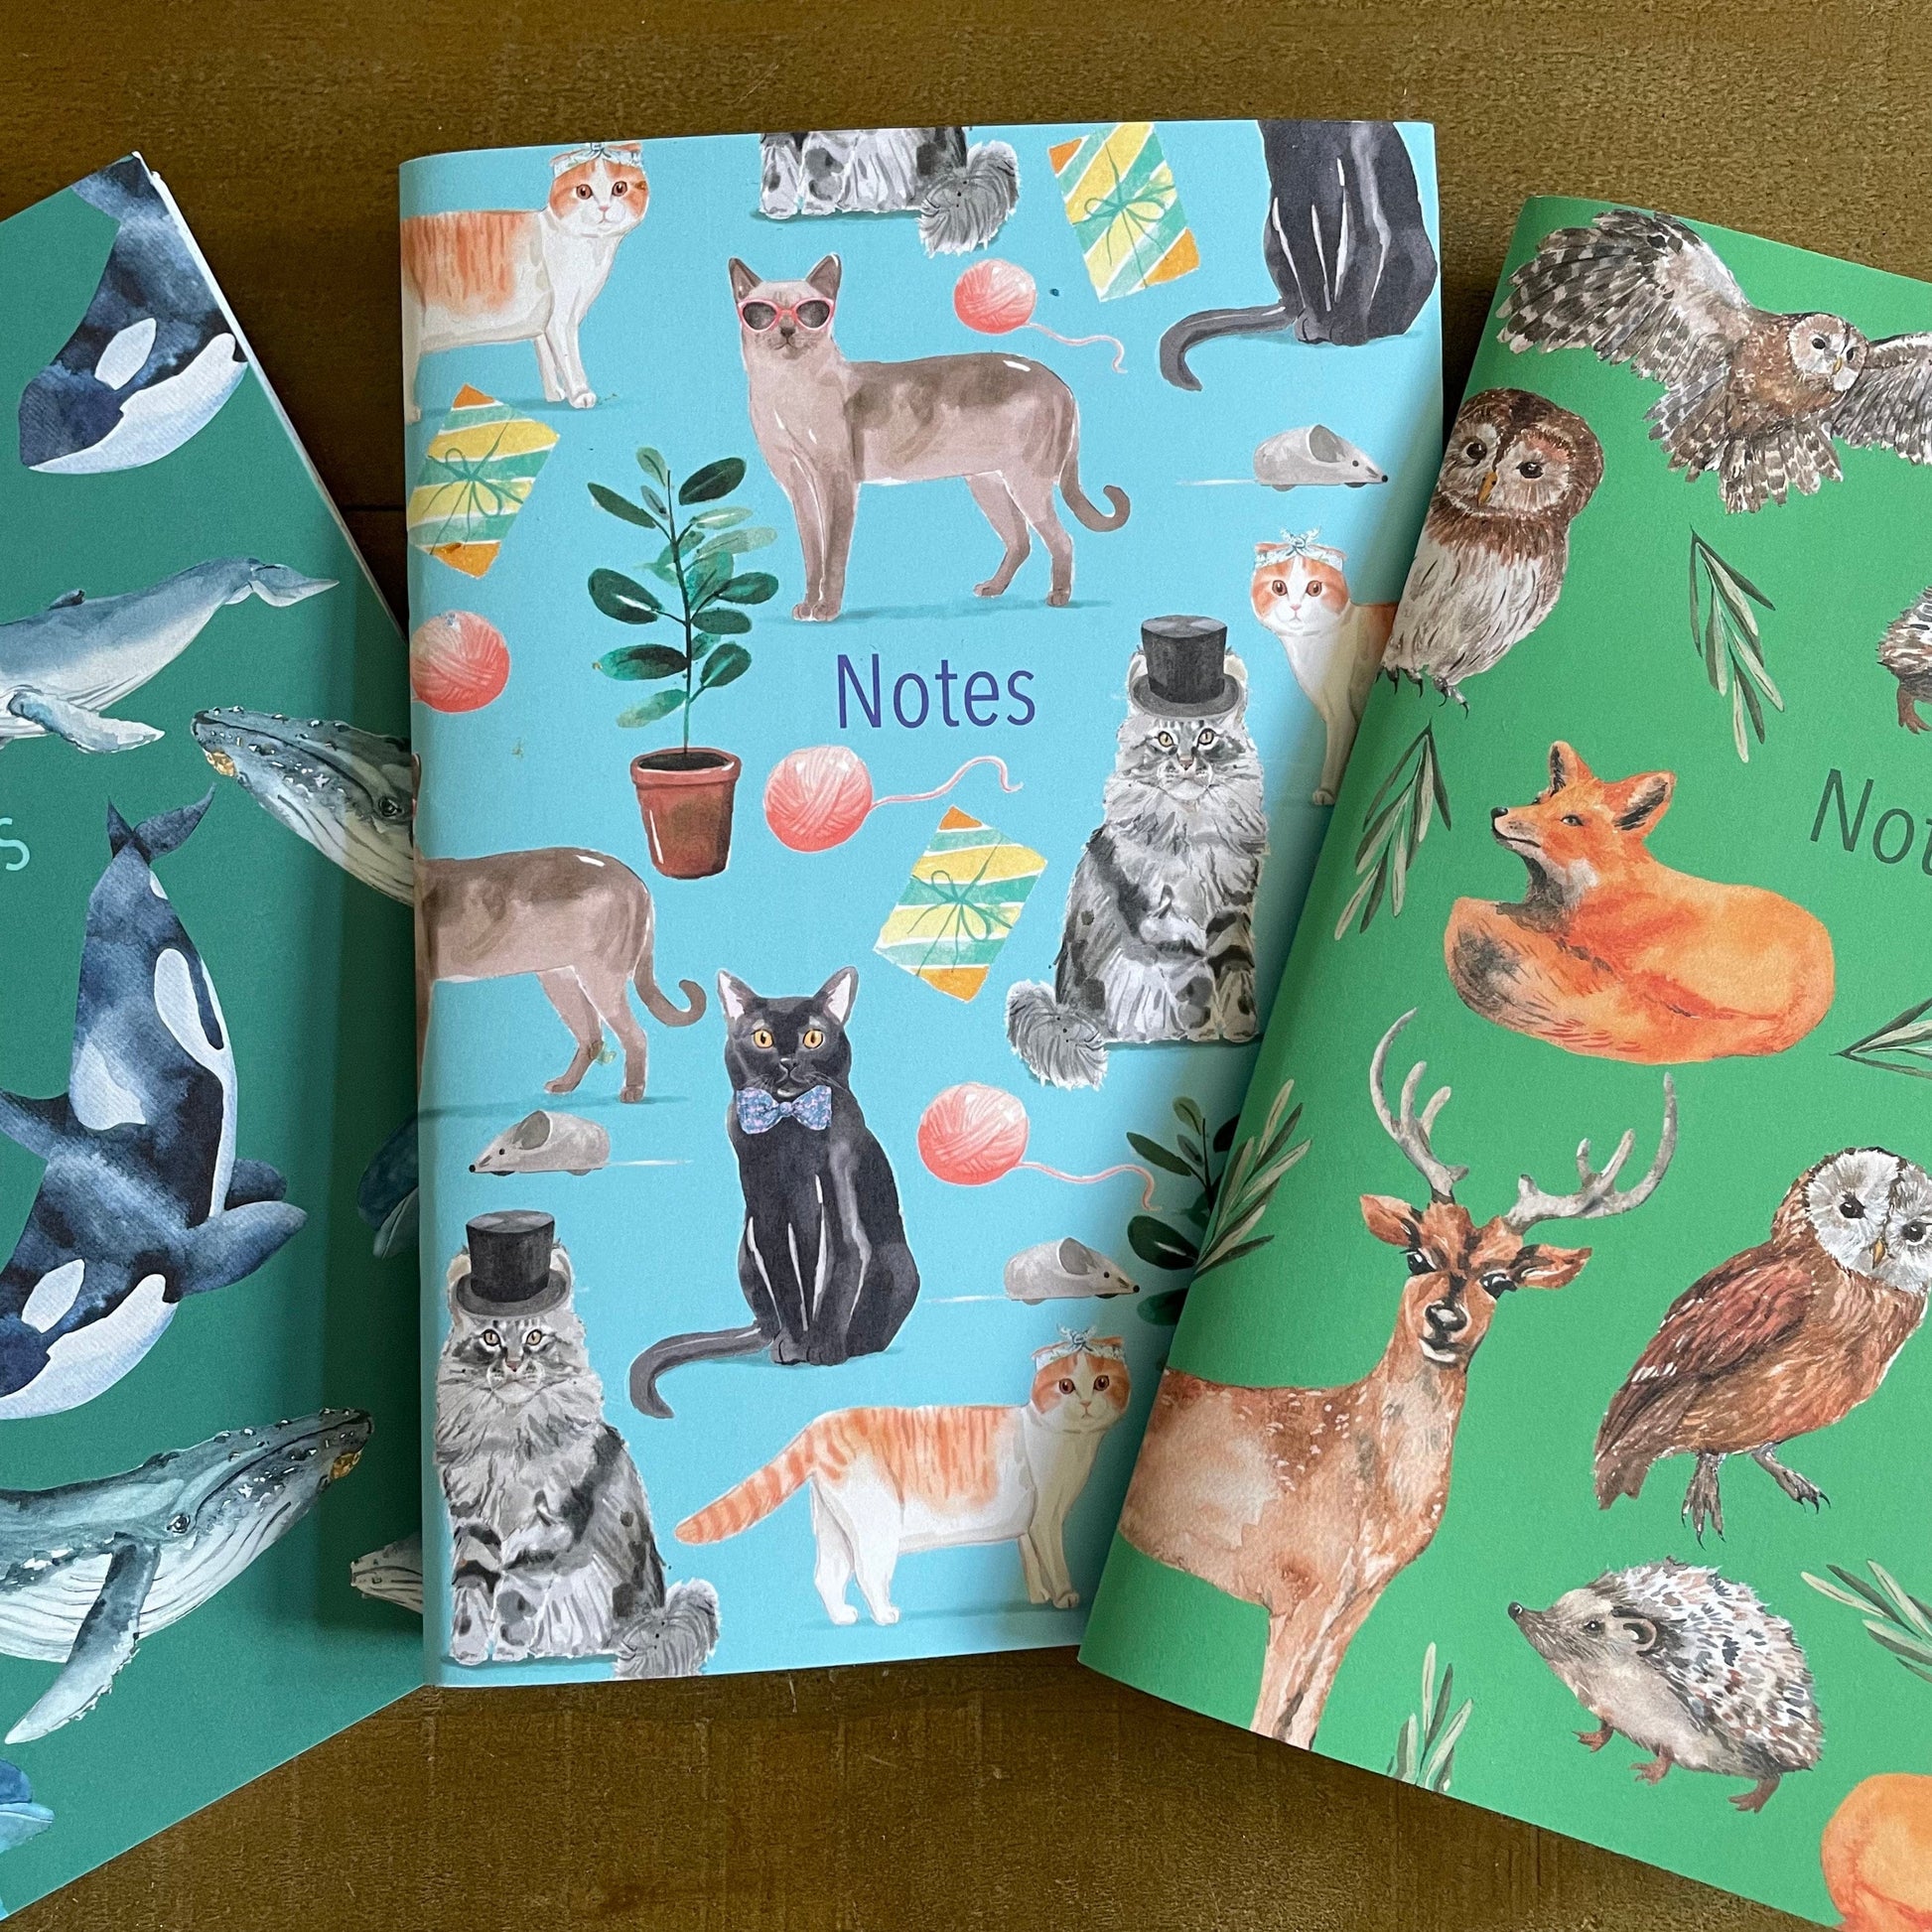 And Hope Designs Notebook Set of 3 A5 animal lined notebooks